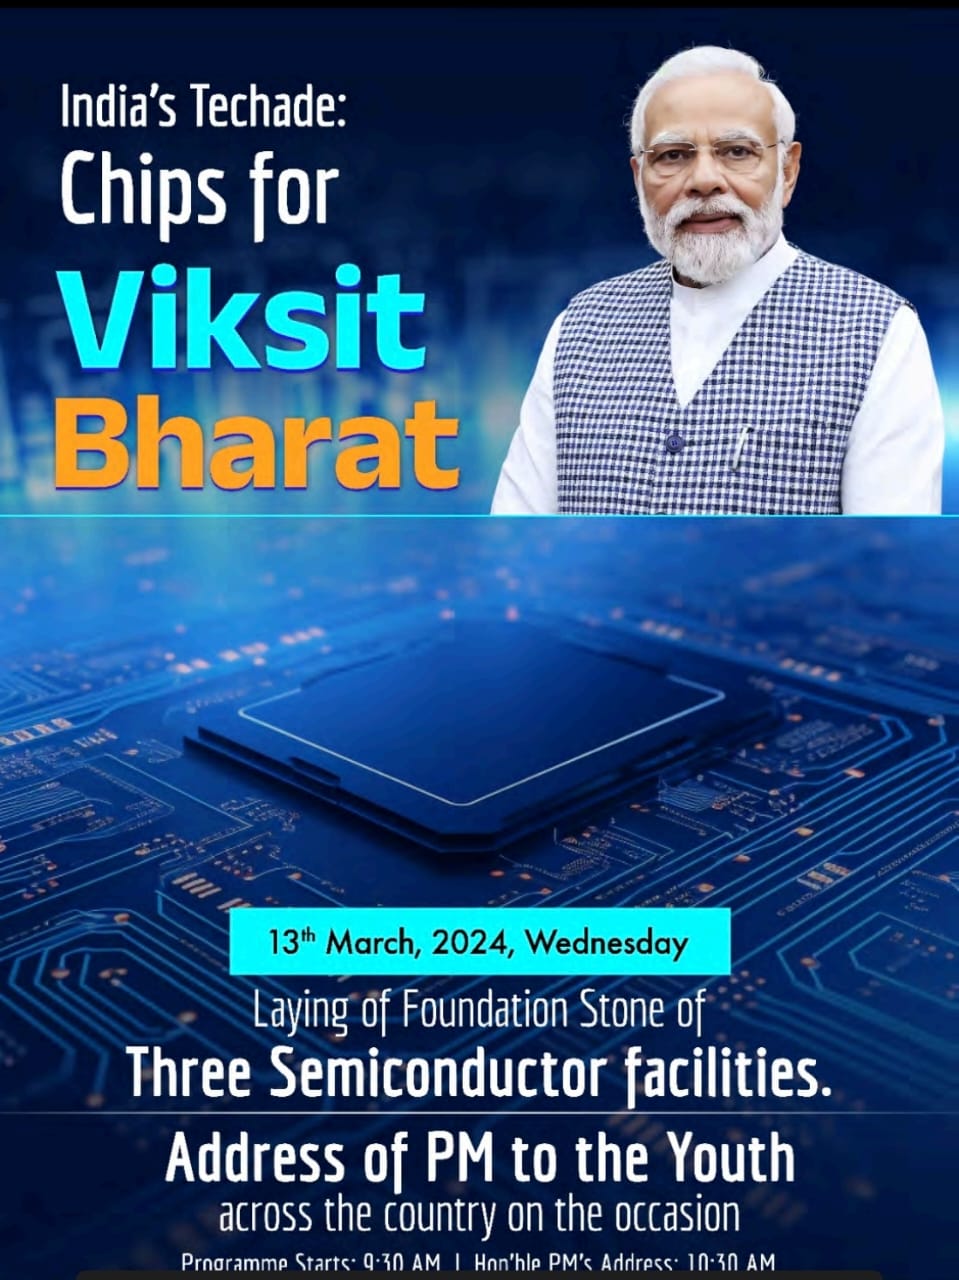 India Techade chips for Viksit Bharat